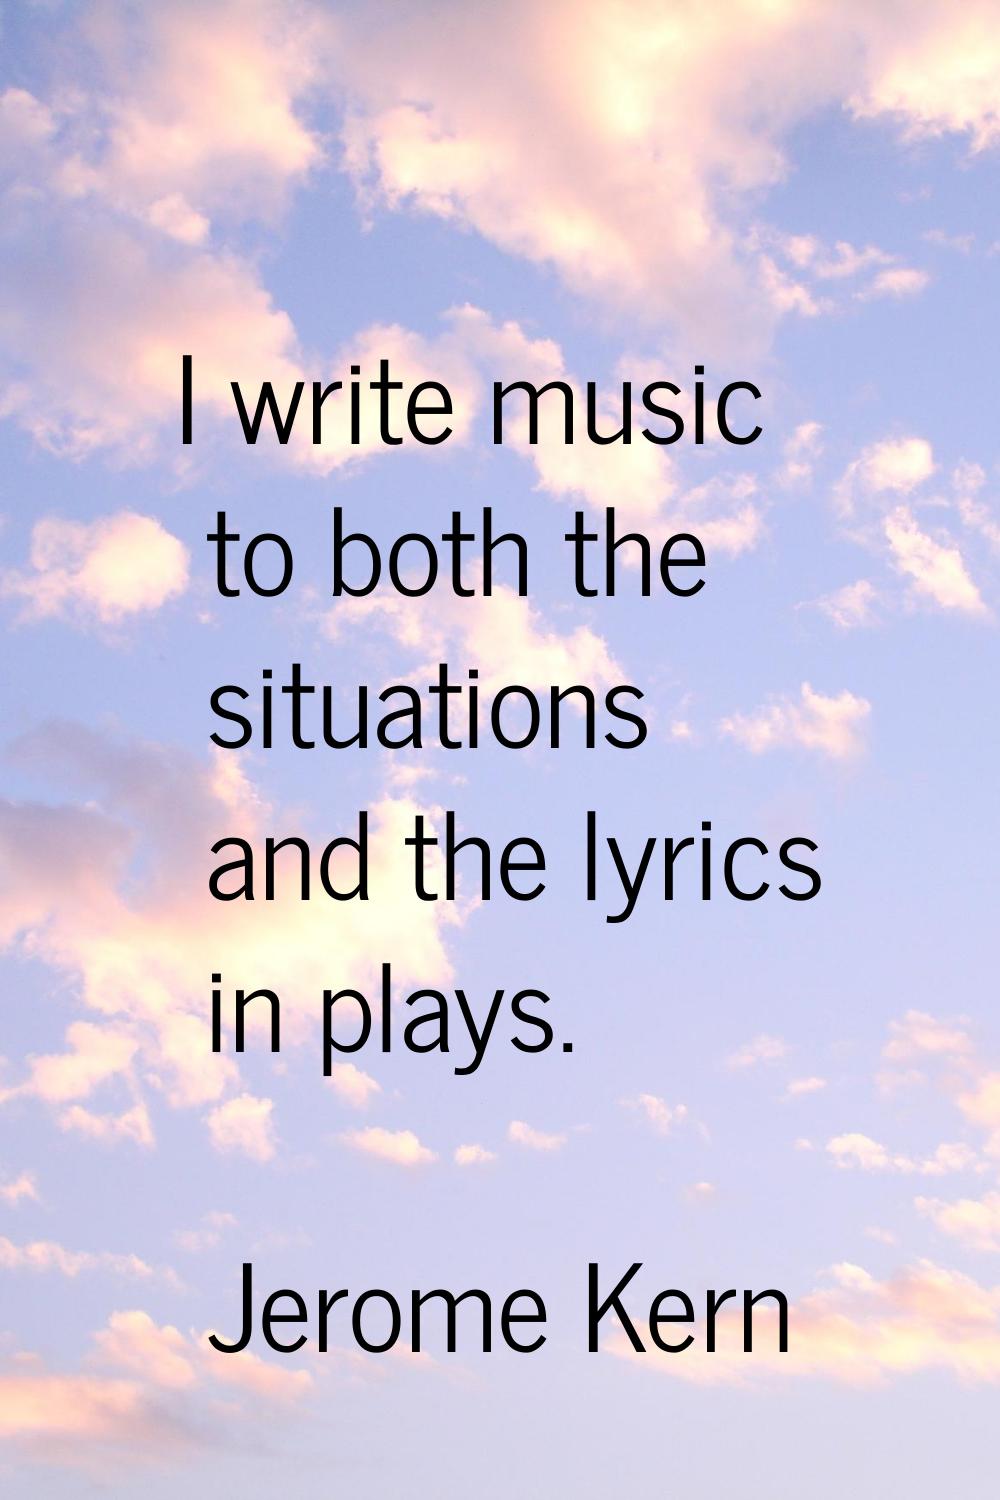 I write music to both the situations and the lyrics in plays.